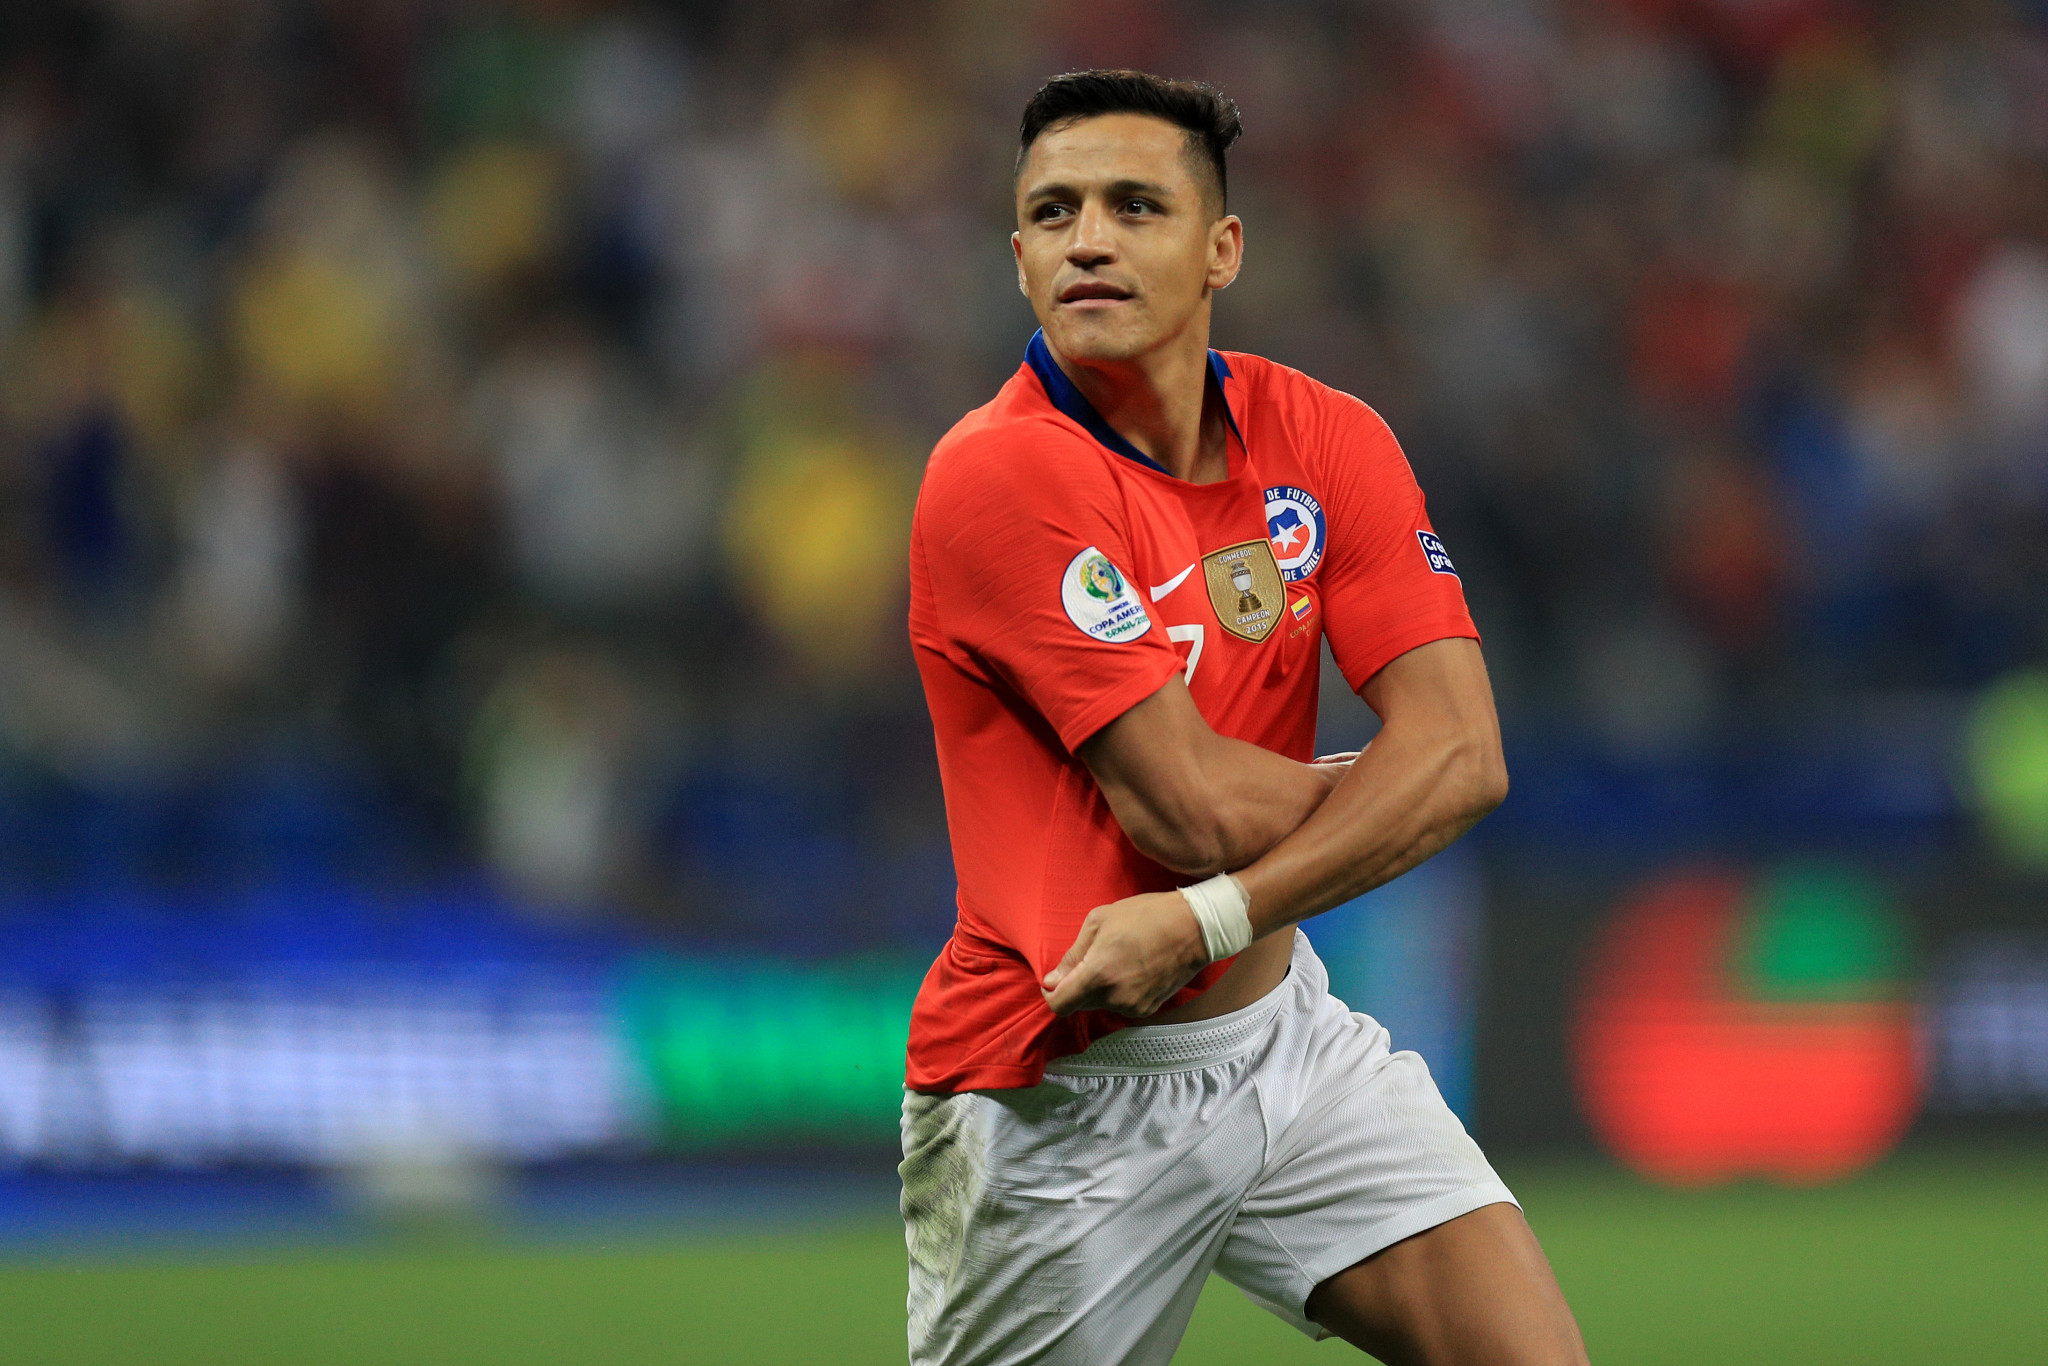 Alexis Sánchez scored the decisive penalty as Chile remained on course for a third successive Copa América title ©Getty Images